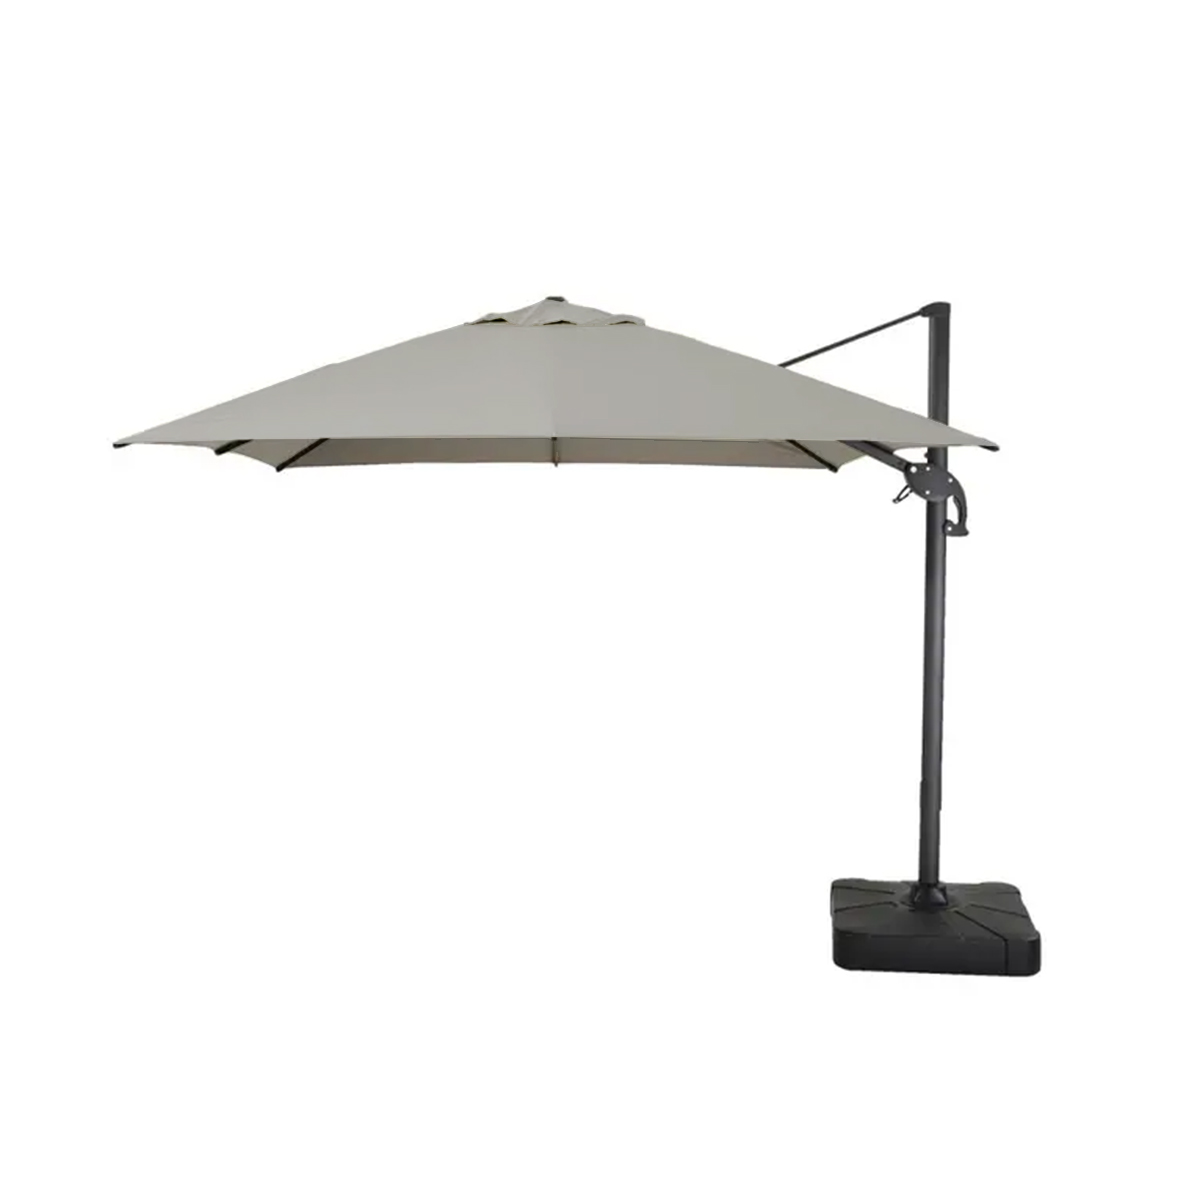 Replacement Canopy for Instyle Outdoor 10' Umbrella-RipLock 350